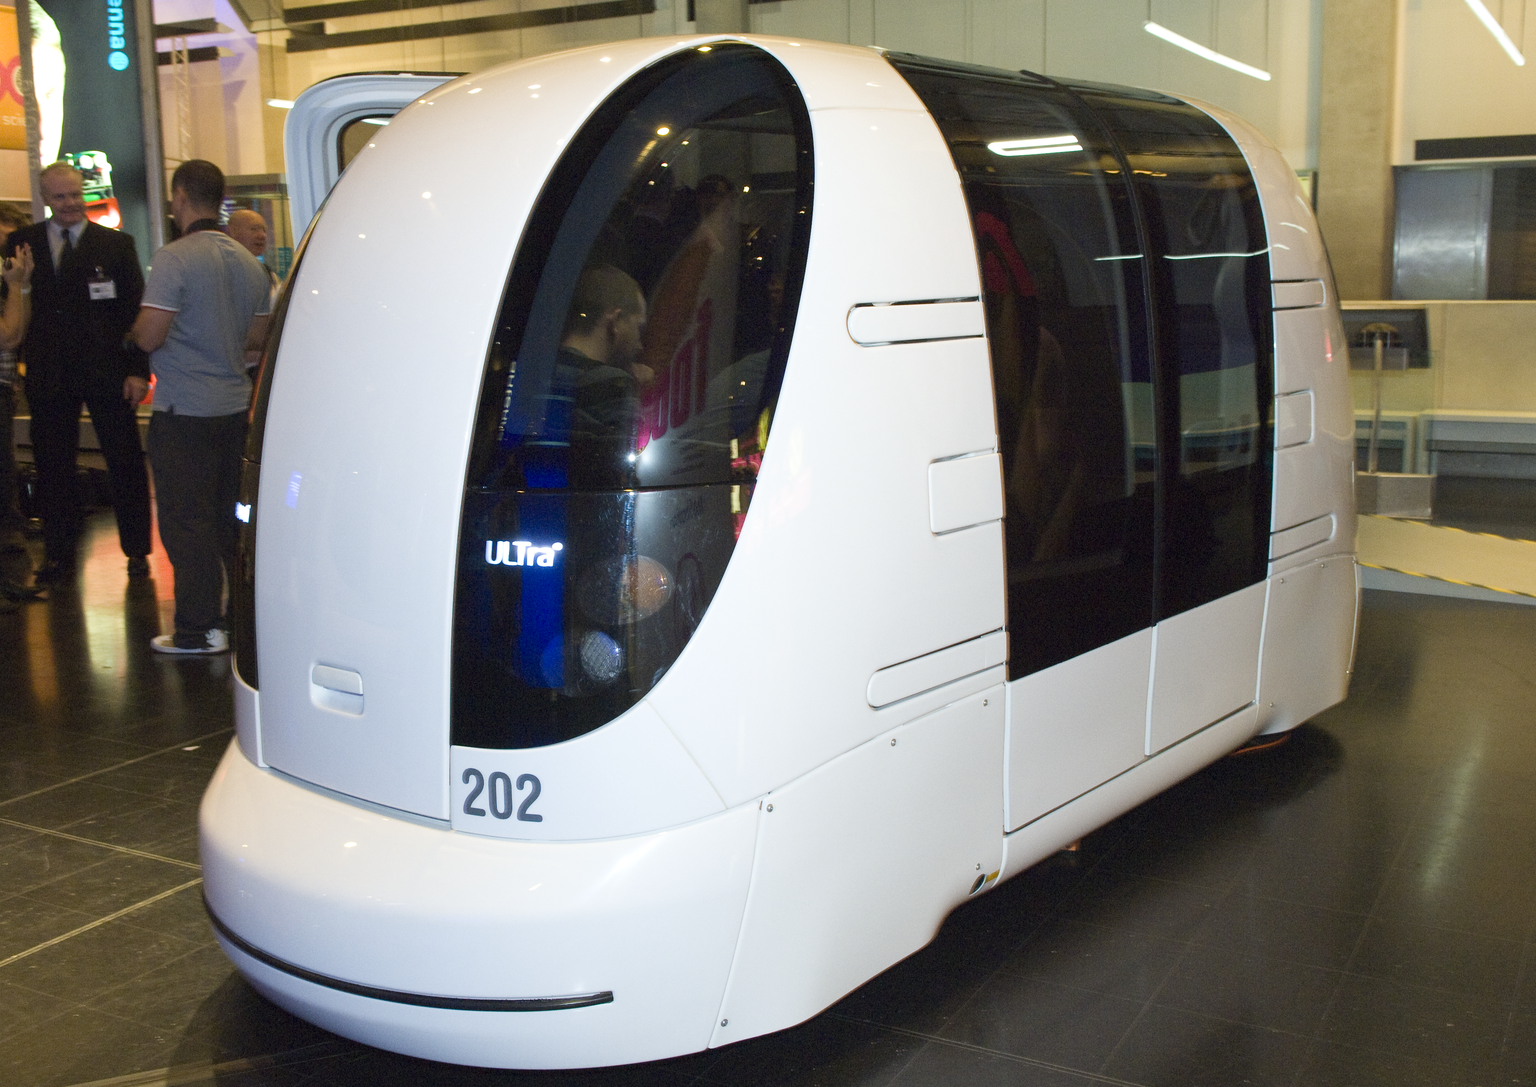 ULTra personal rapid transit pod car on show at the Science Museum, London, 13 August 2009